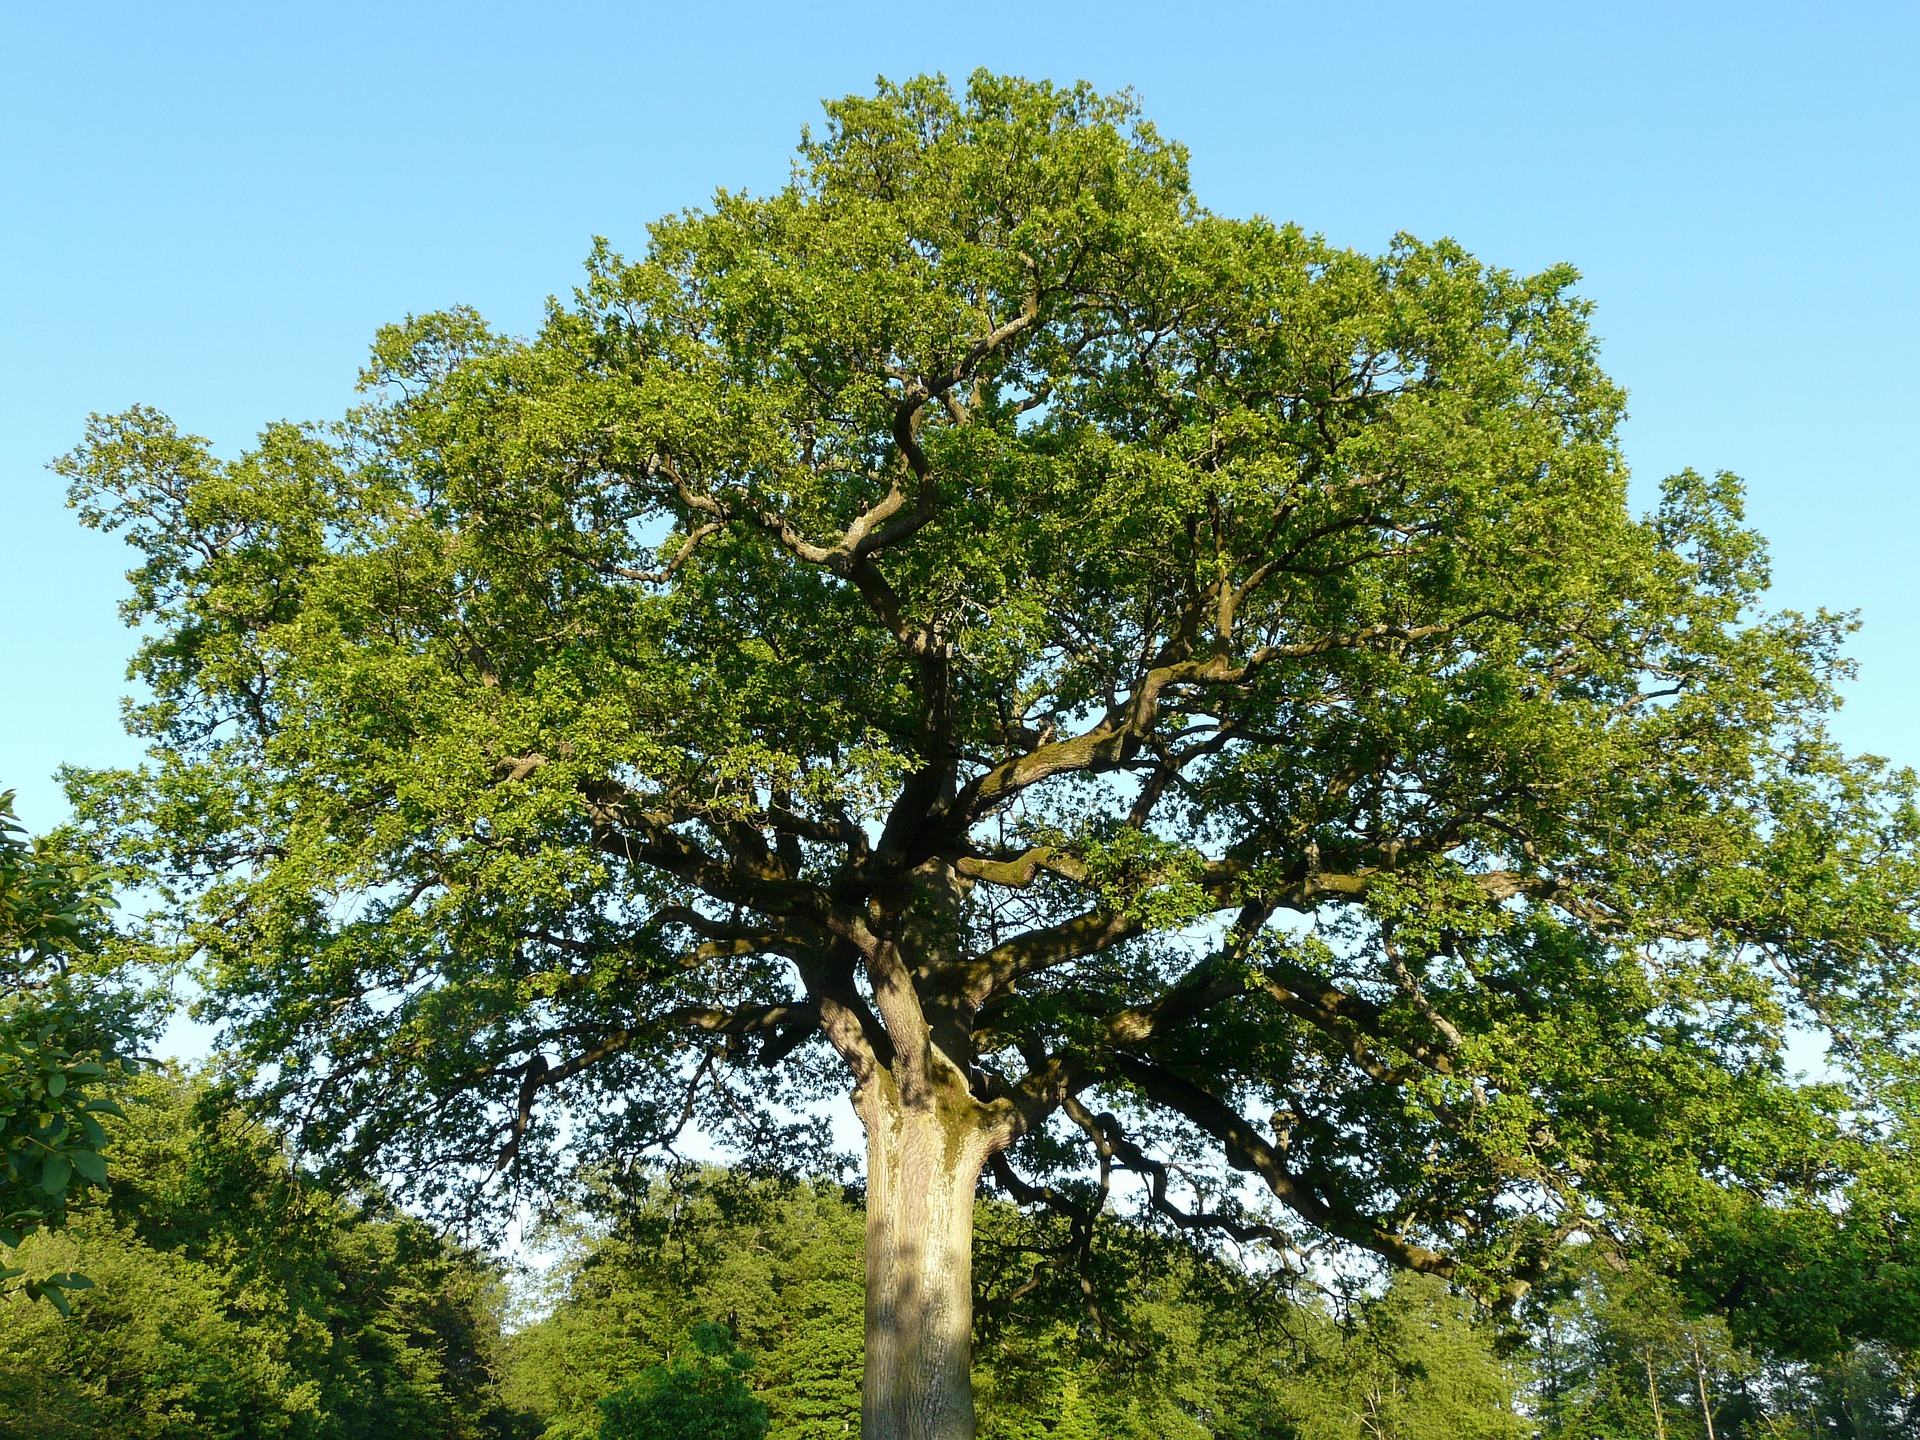  A large oak tree towers over smaller trees in Ohio.